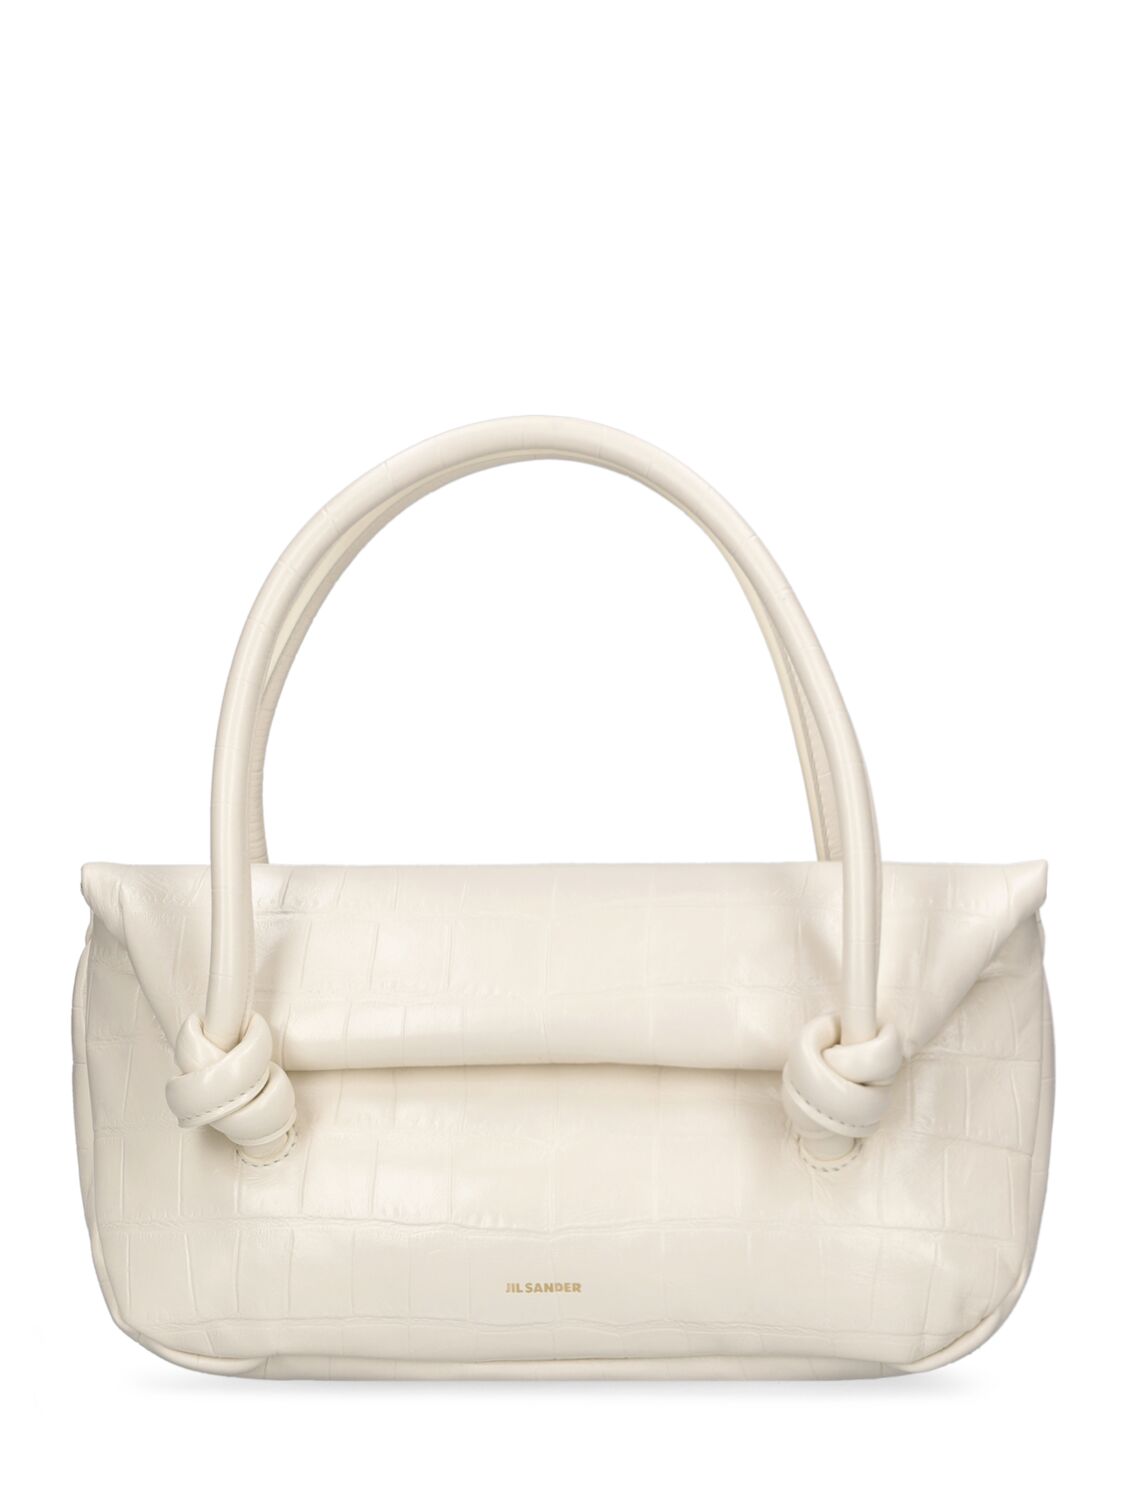 Jil Sander Small Knot Leather Top Handle Bag In Eggshell